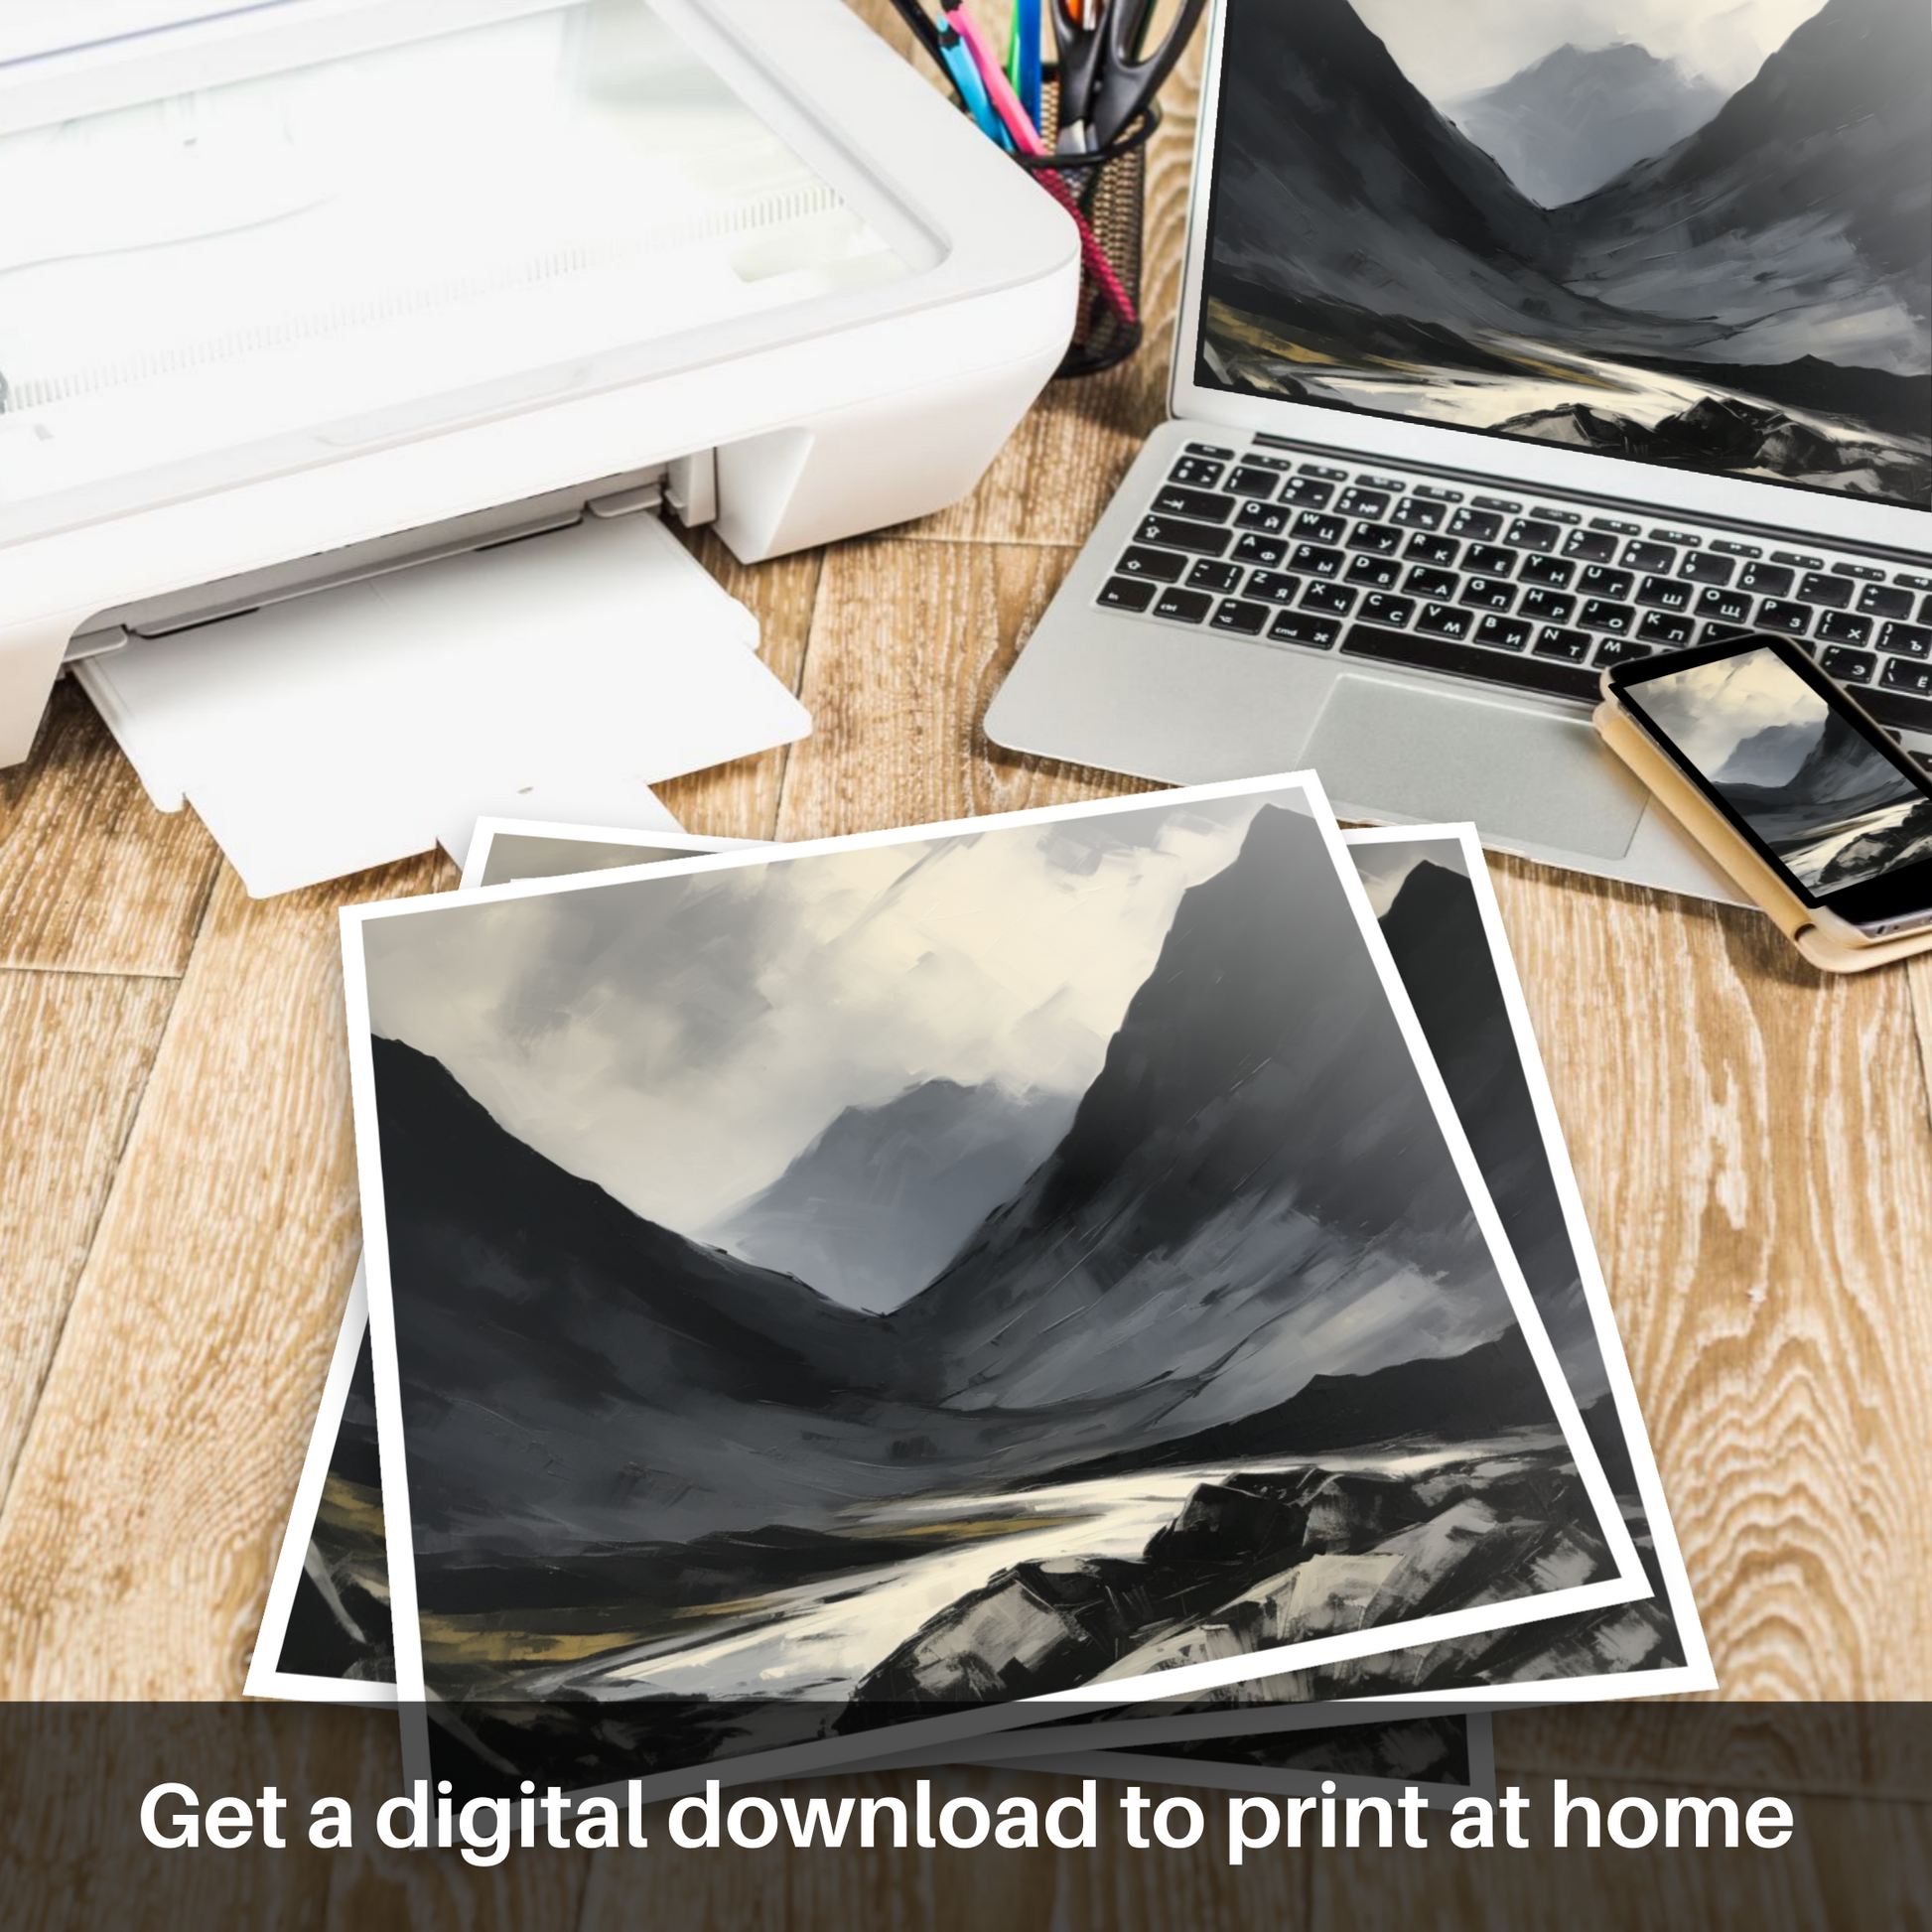 Downloadable and printable picture of Silhouetted peaks in Glencoe